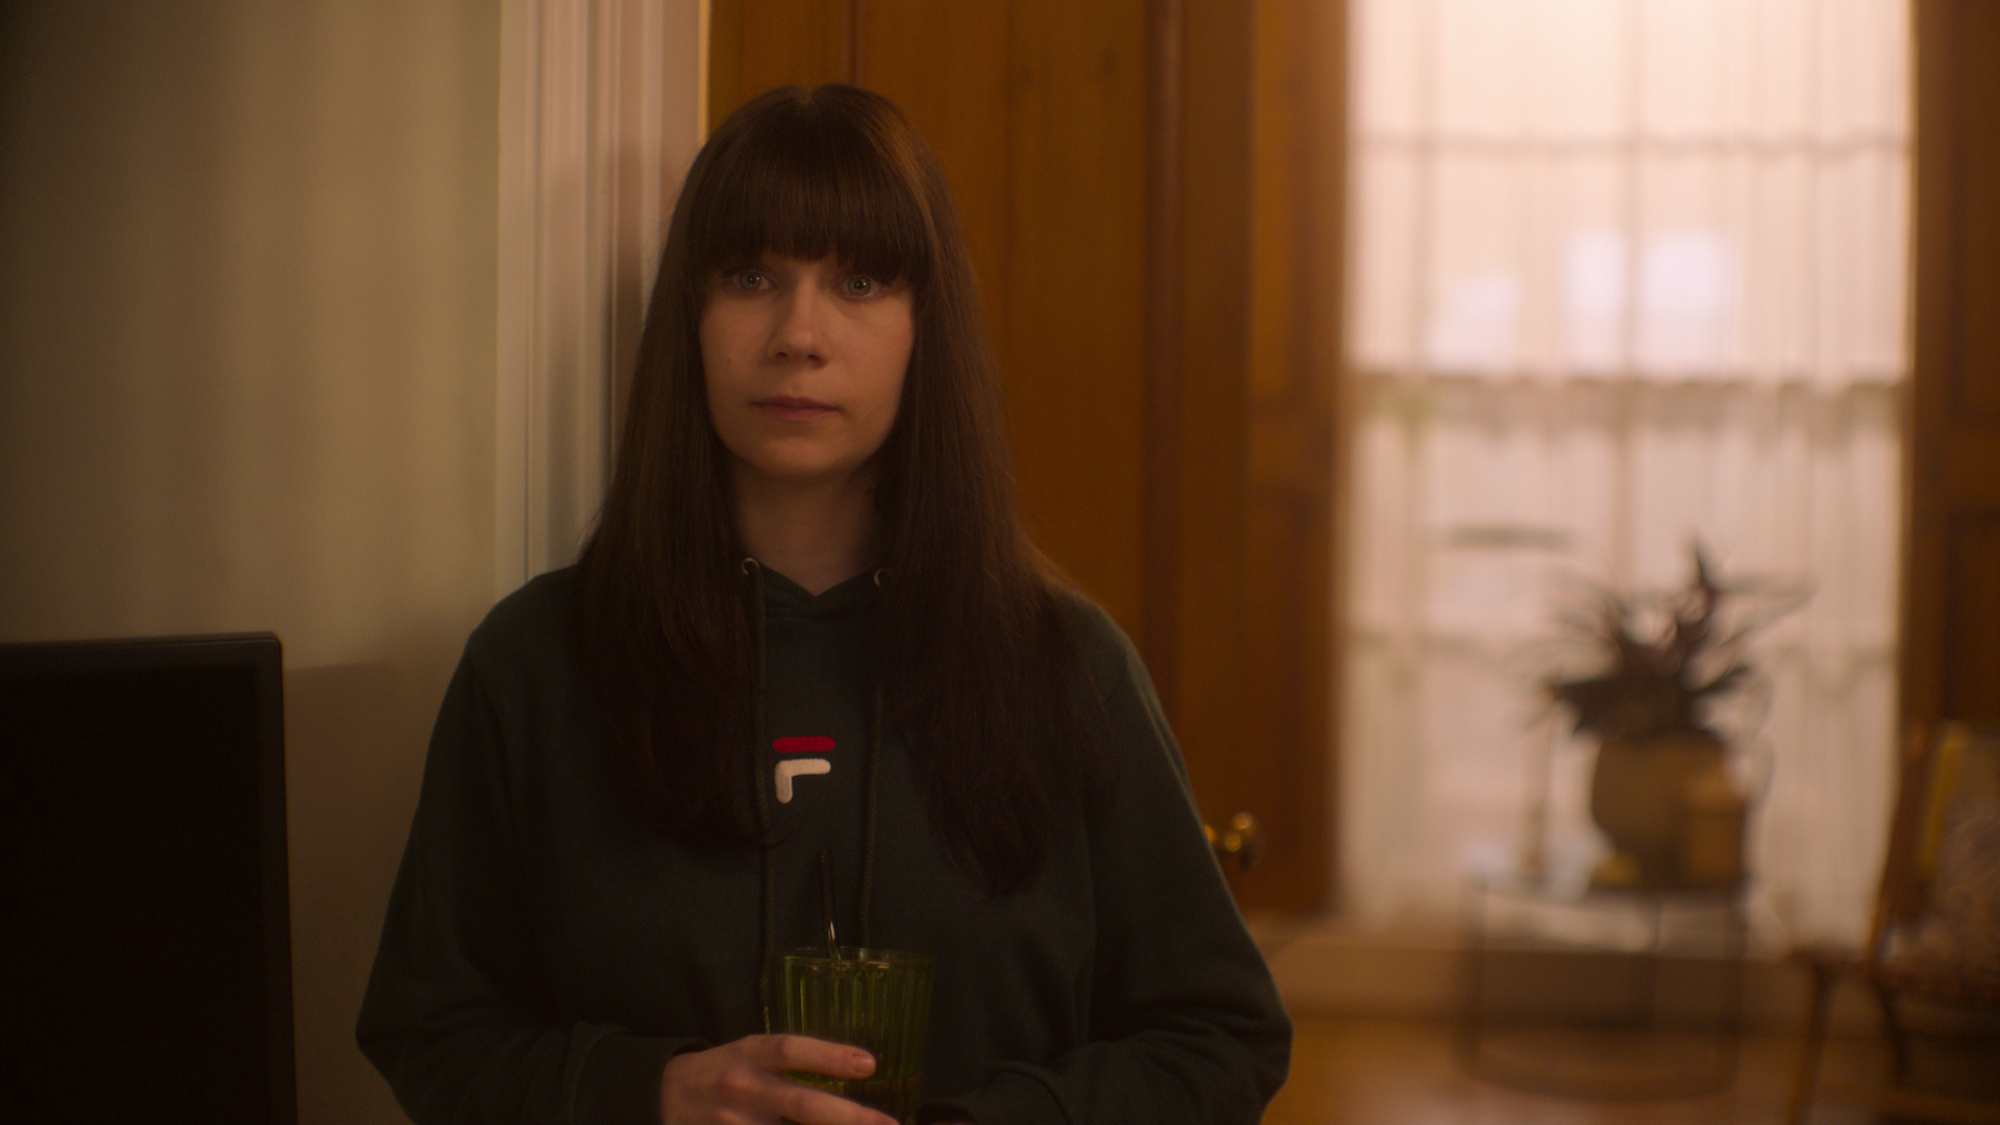 In the TV series "Heartstopper" Jenny Walser plays Tori, standing in a living room holding a glass.